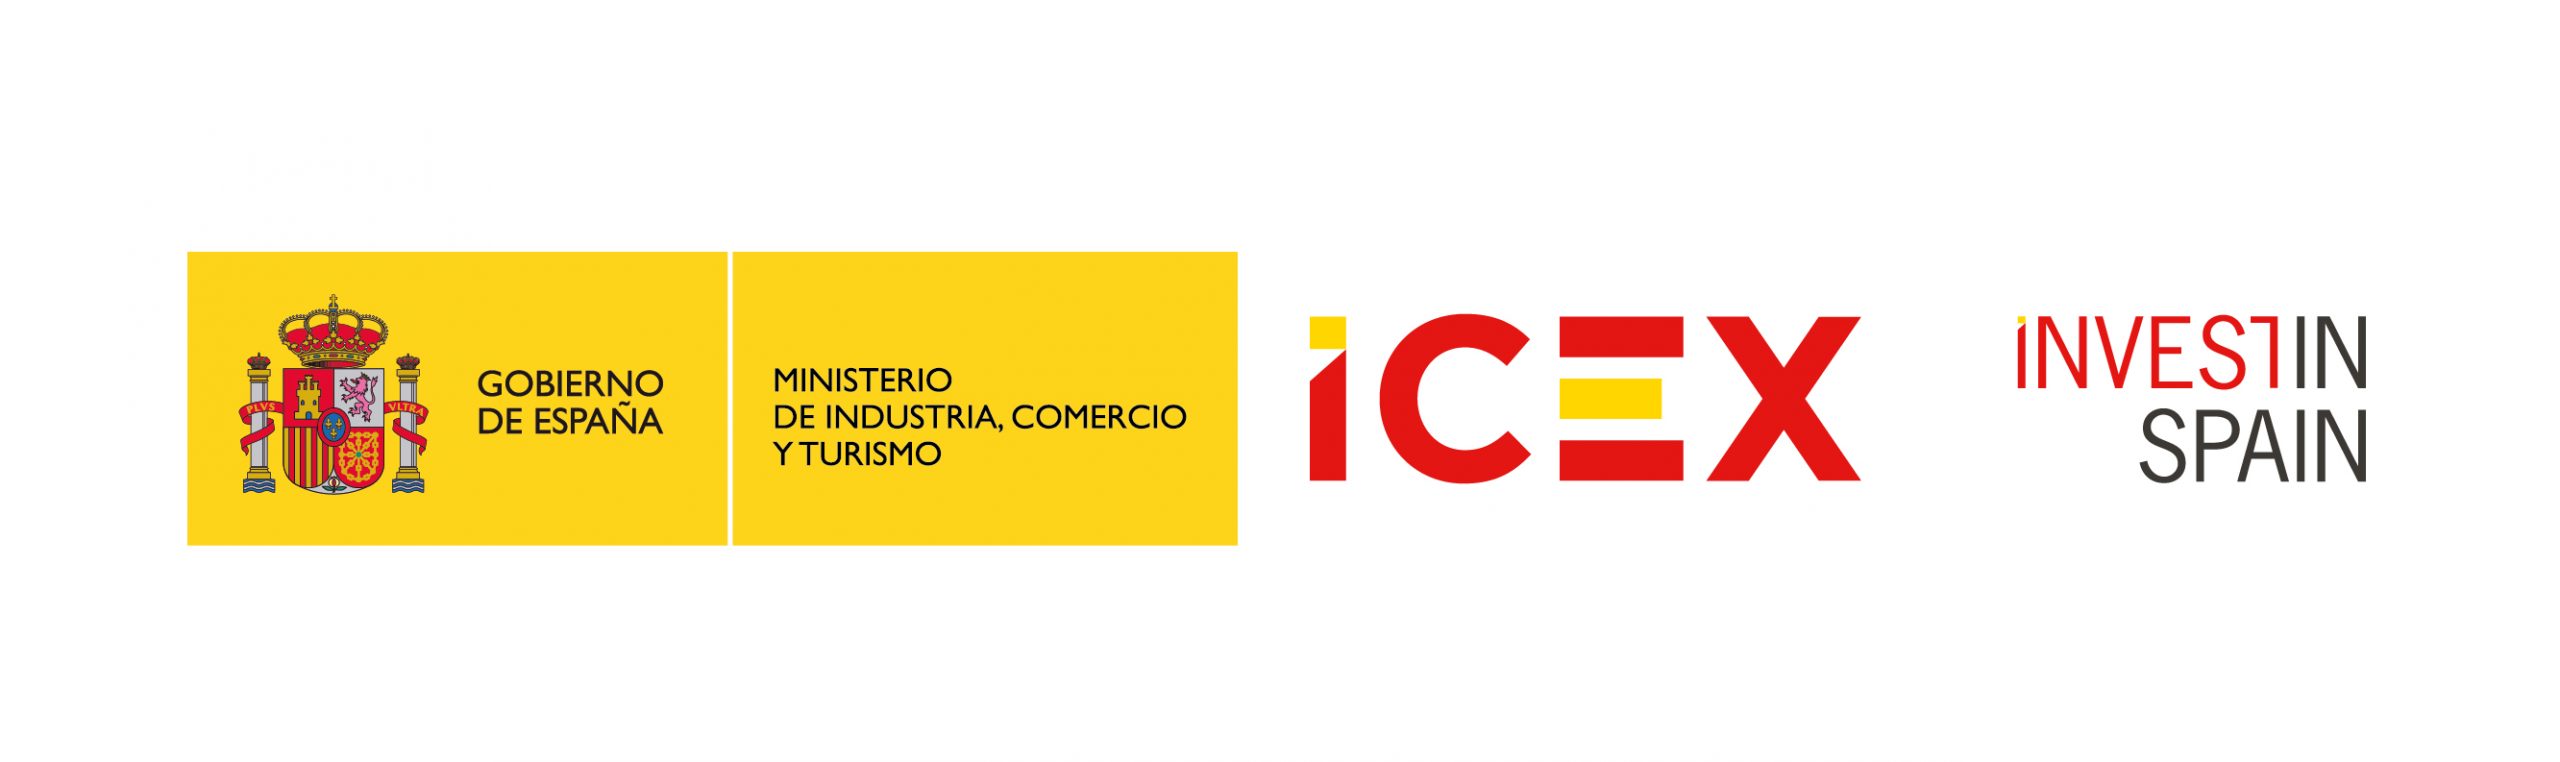 icex_gobierno_new_inves